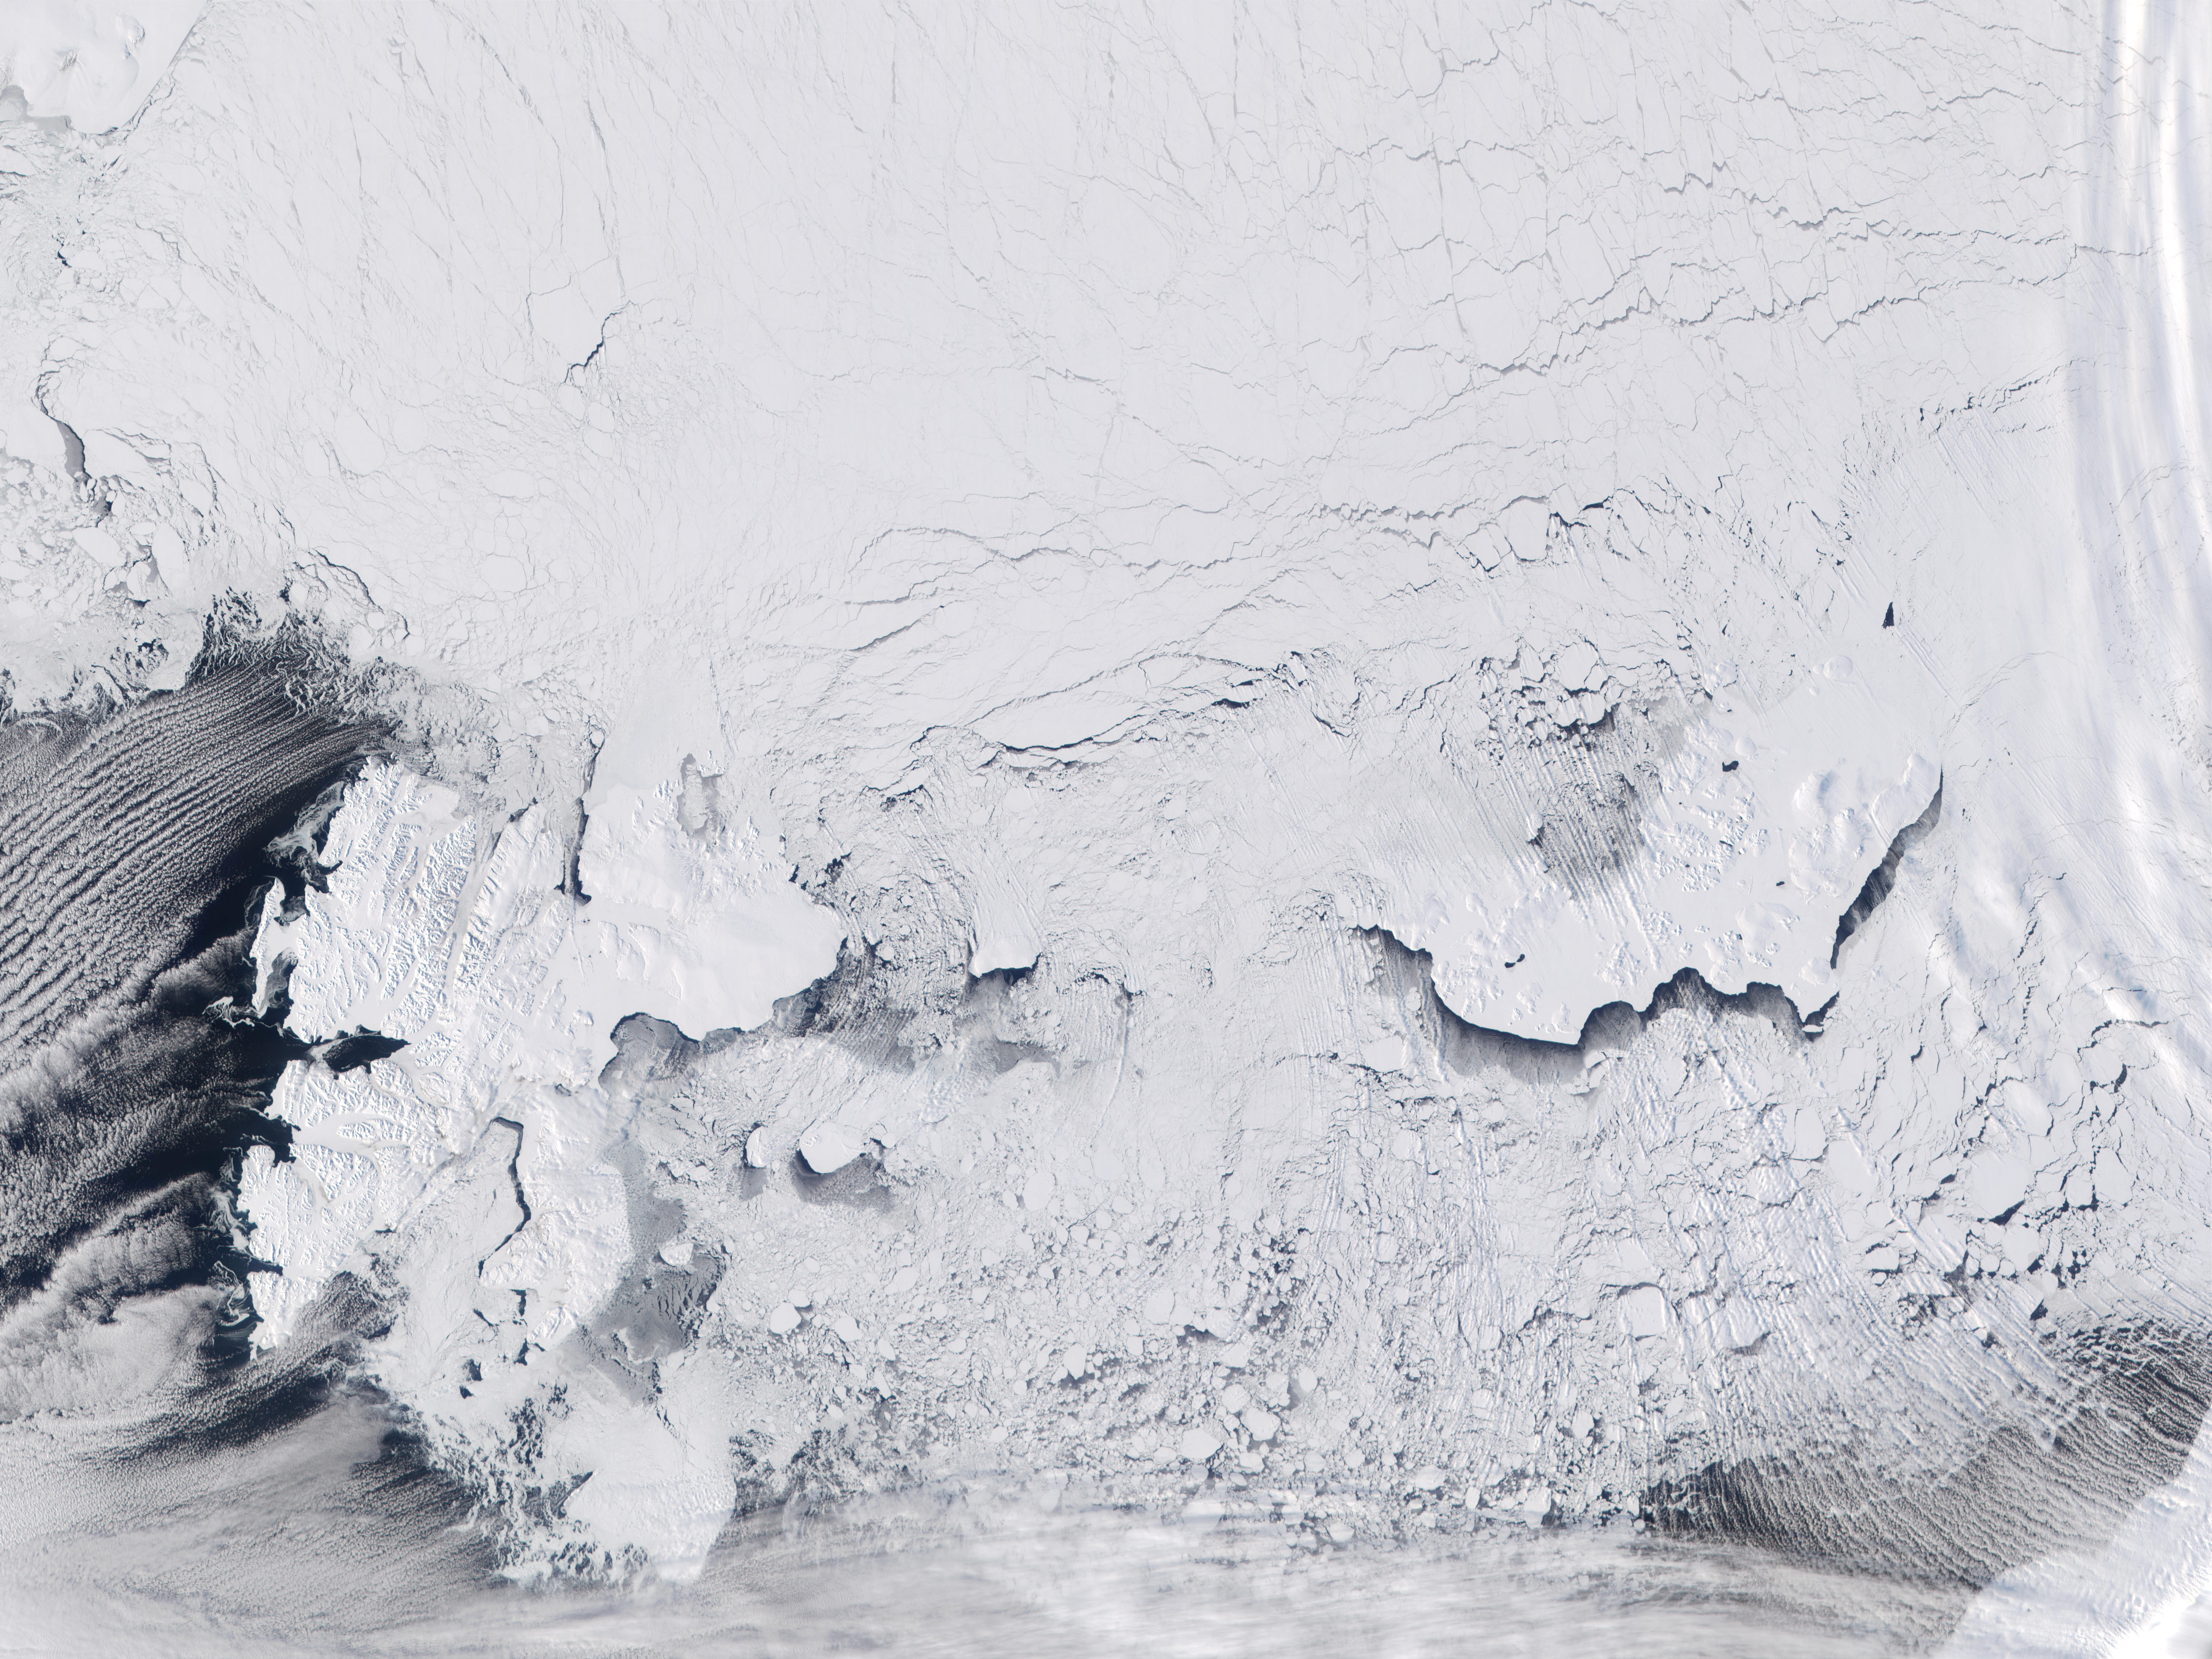 Svalbard and Franz Josef Land, Arctic Ocean - related image preview